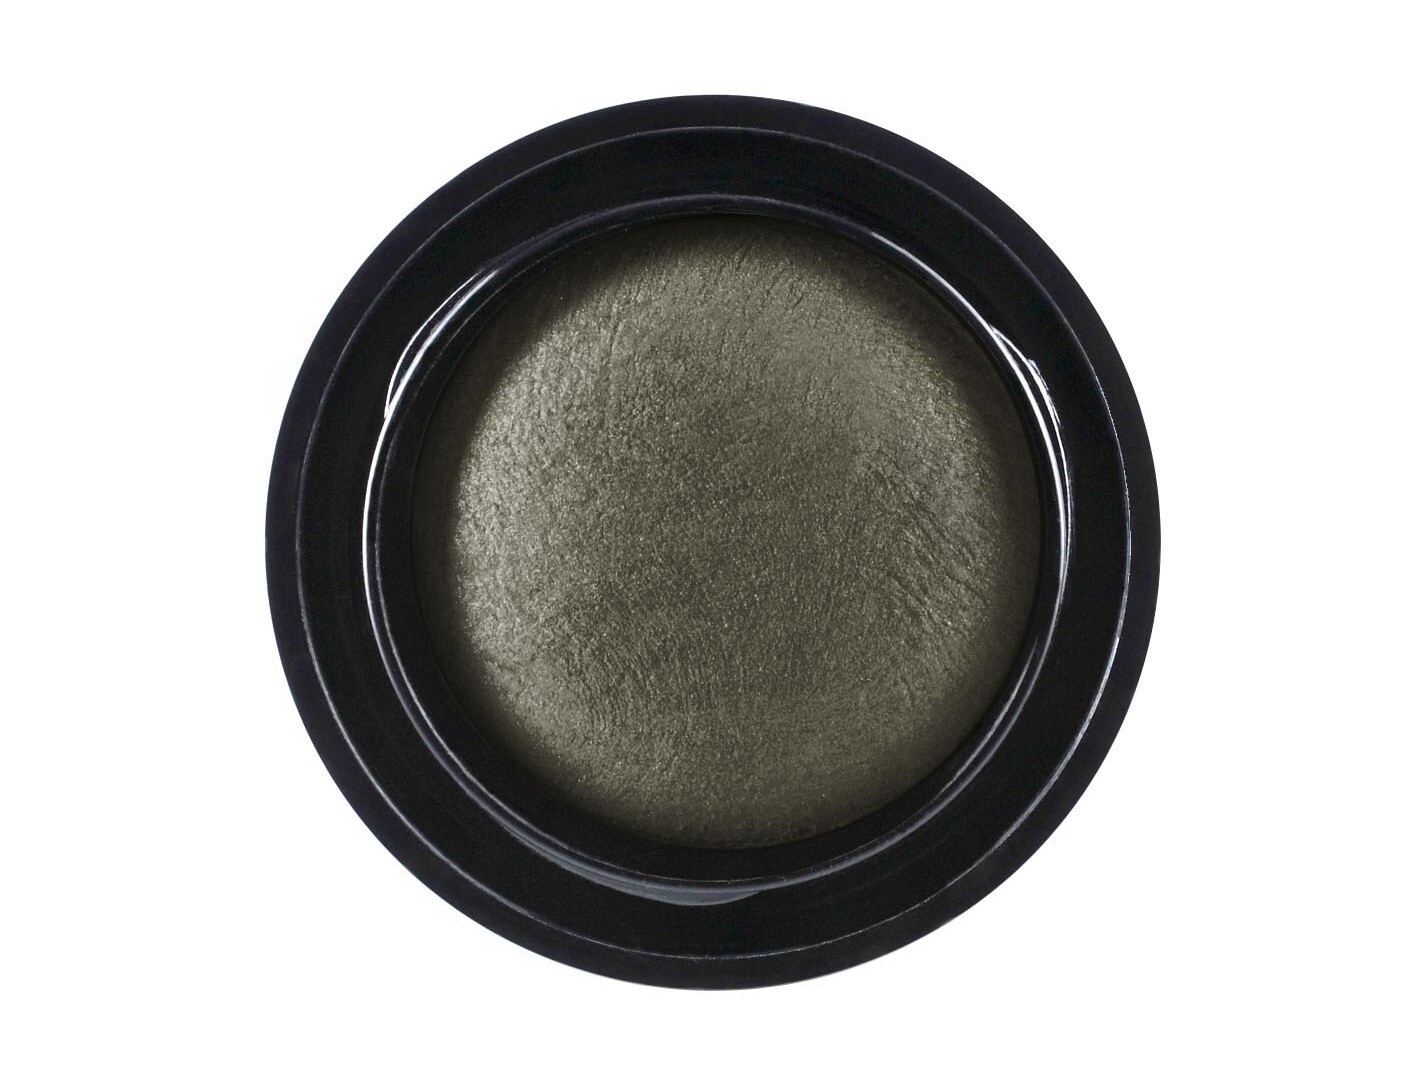 Make-up Studio Eyeshadow LumiÃ¨re Refill Mysterious Taupe 1.8gr